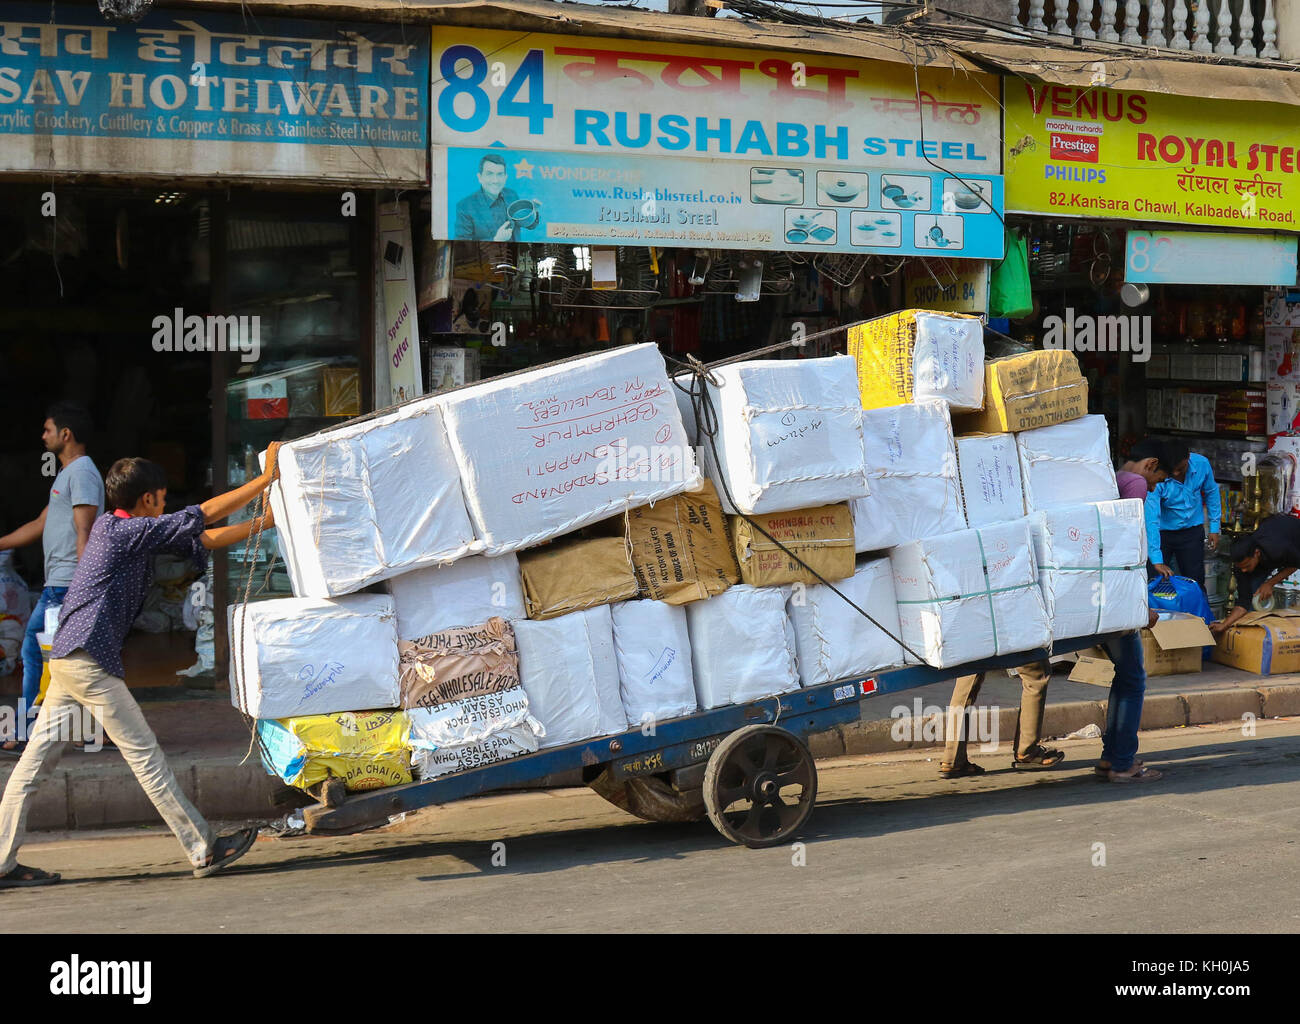 Boxes being transported on a handcart in Mumbai Stock Photo